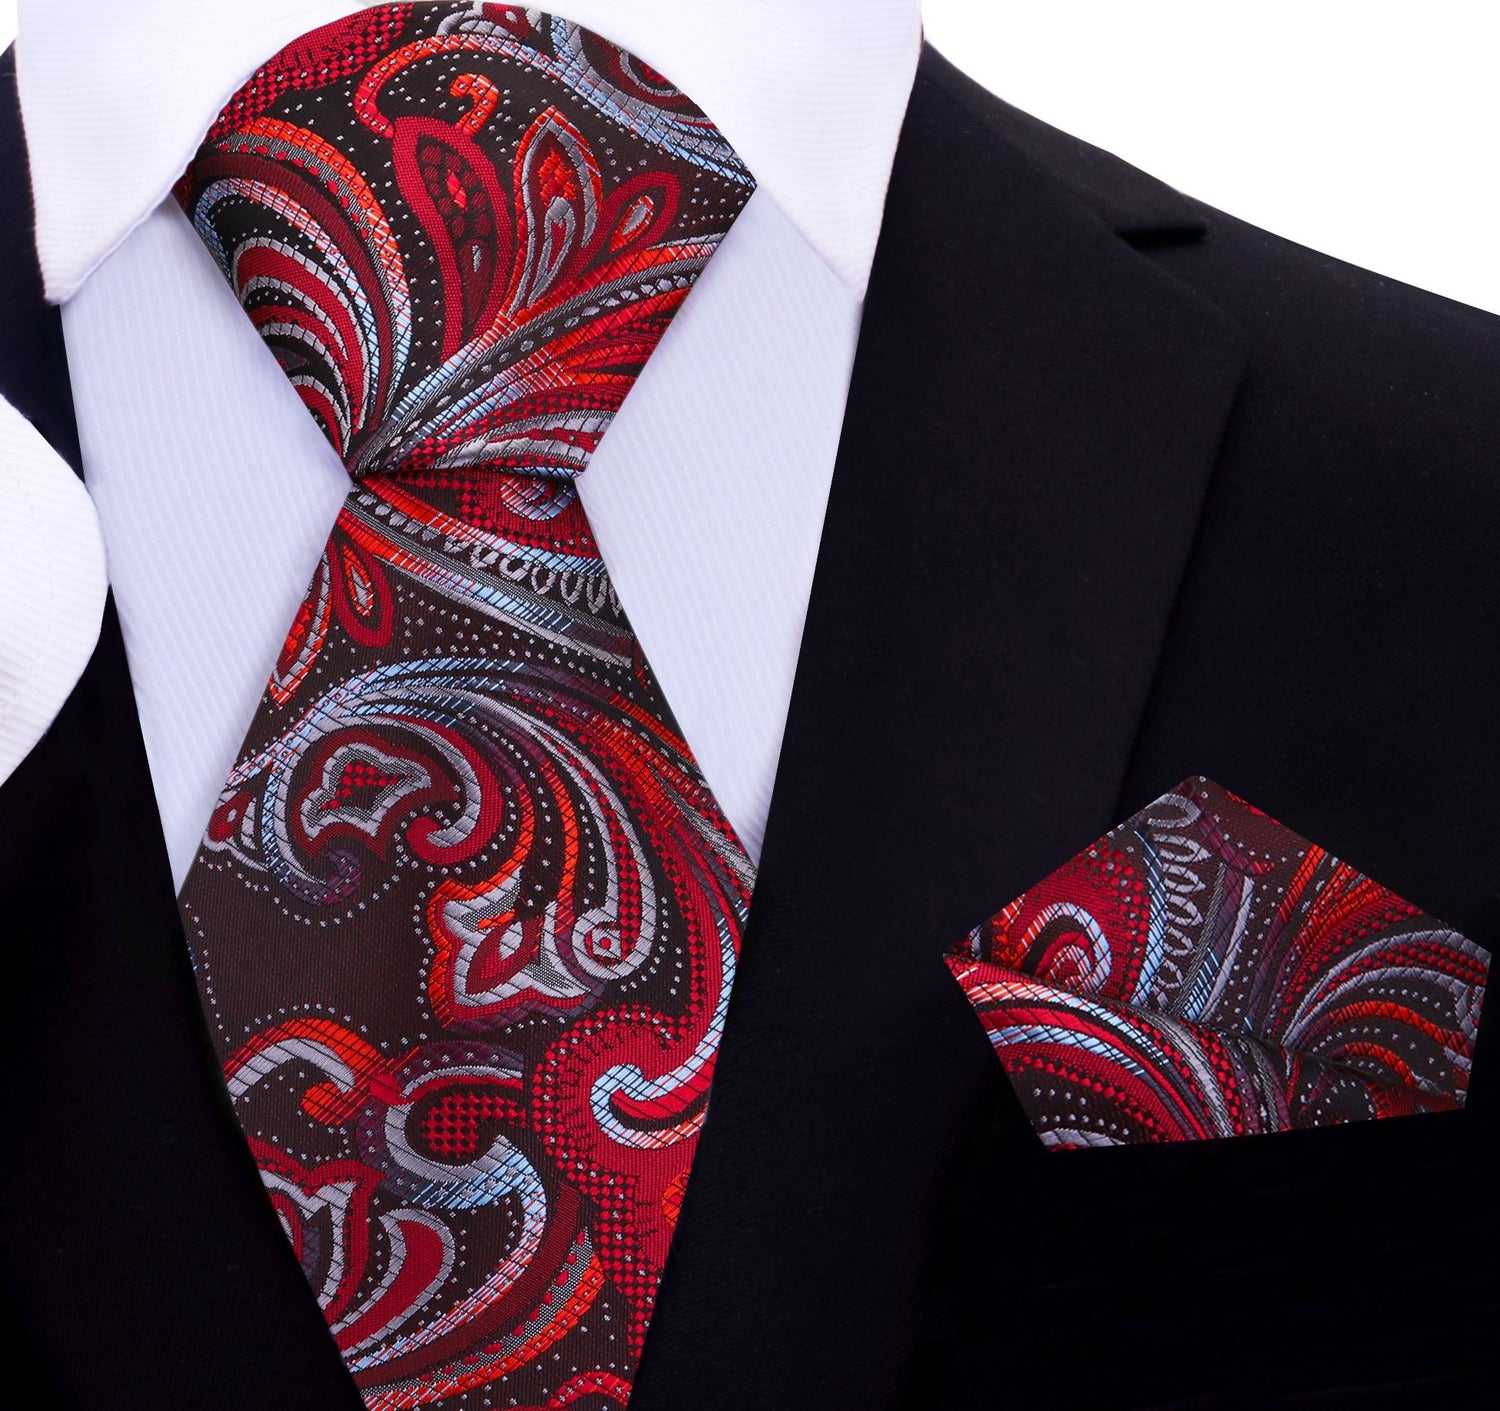 red, black, grey floral tie and pocket square